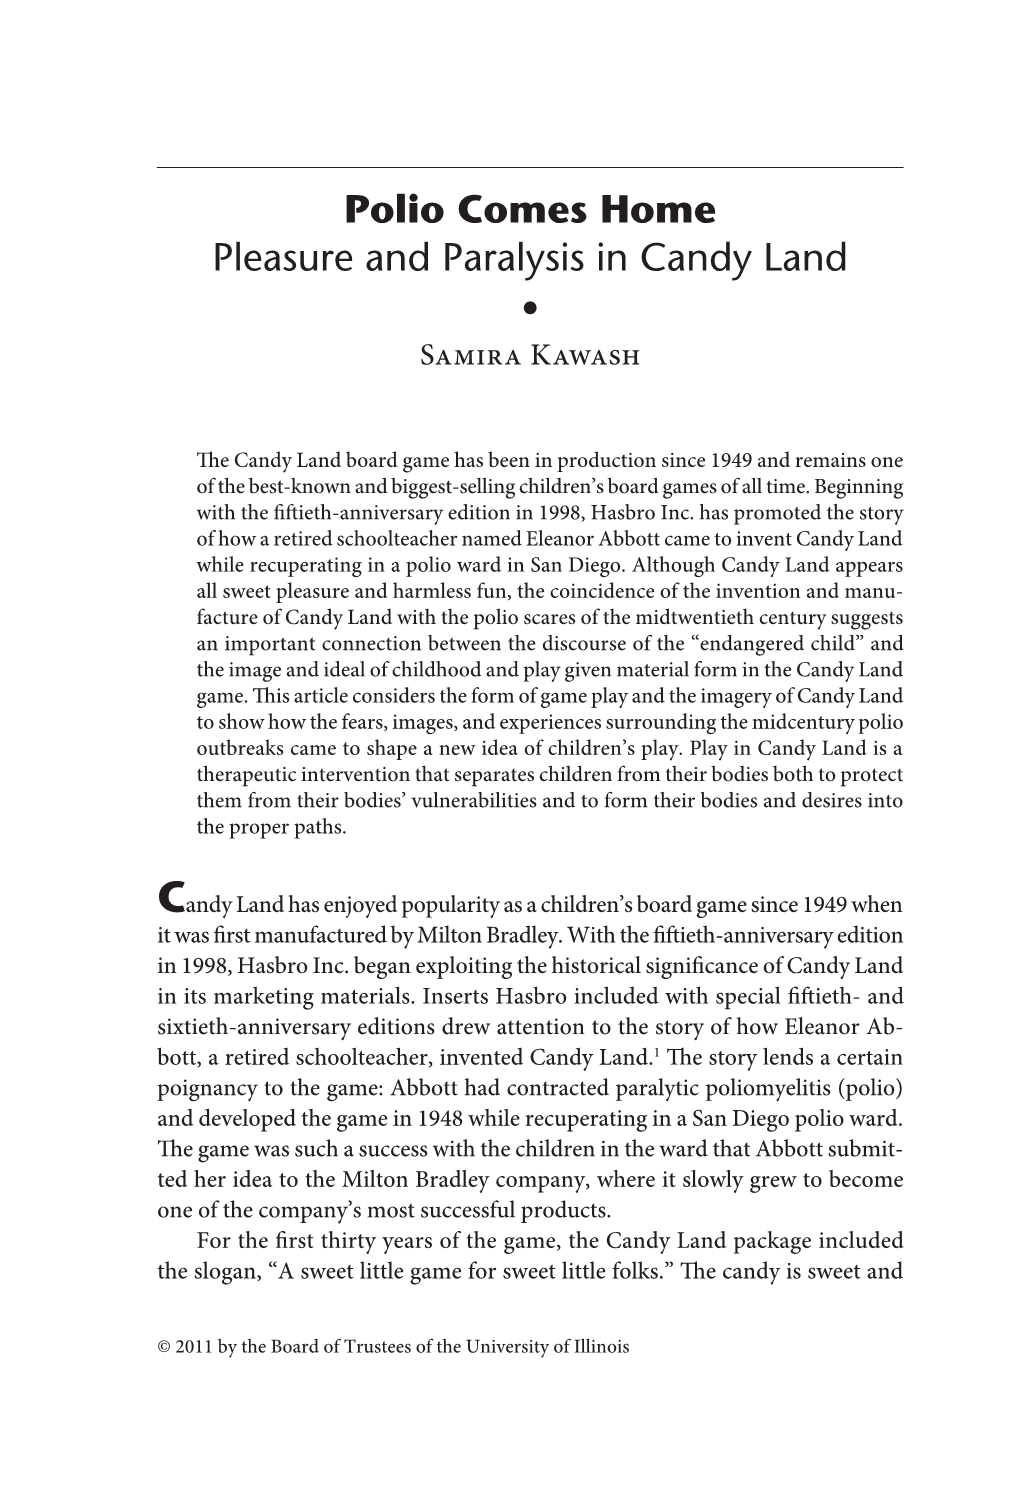 Vol. 3 No. 2 | ARTICLE: Samira Kawash: Polio Comes Home Pleasure and Paralysis in Candy Land |